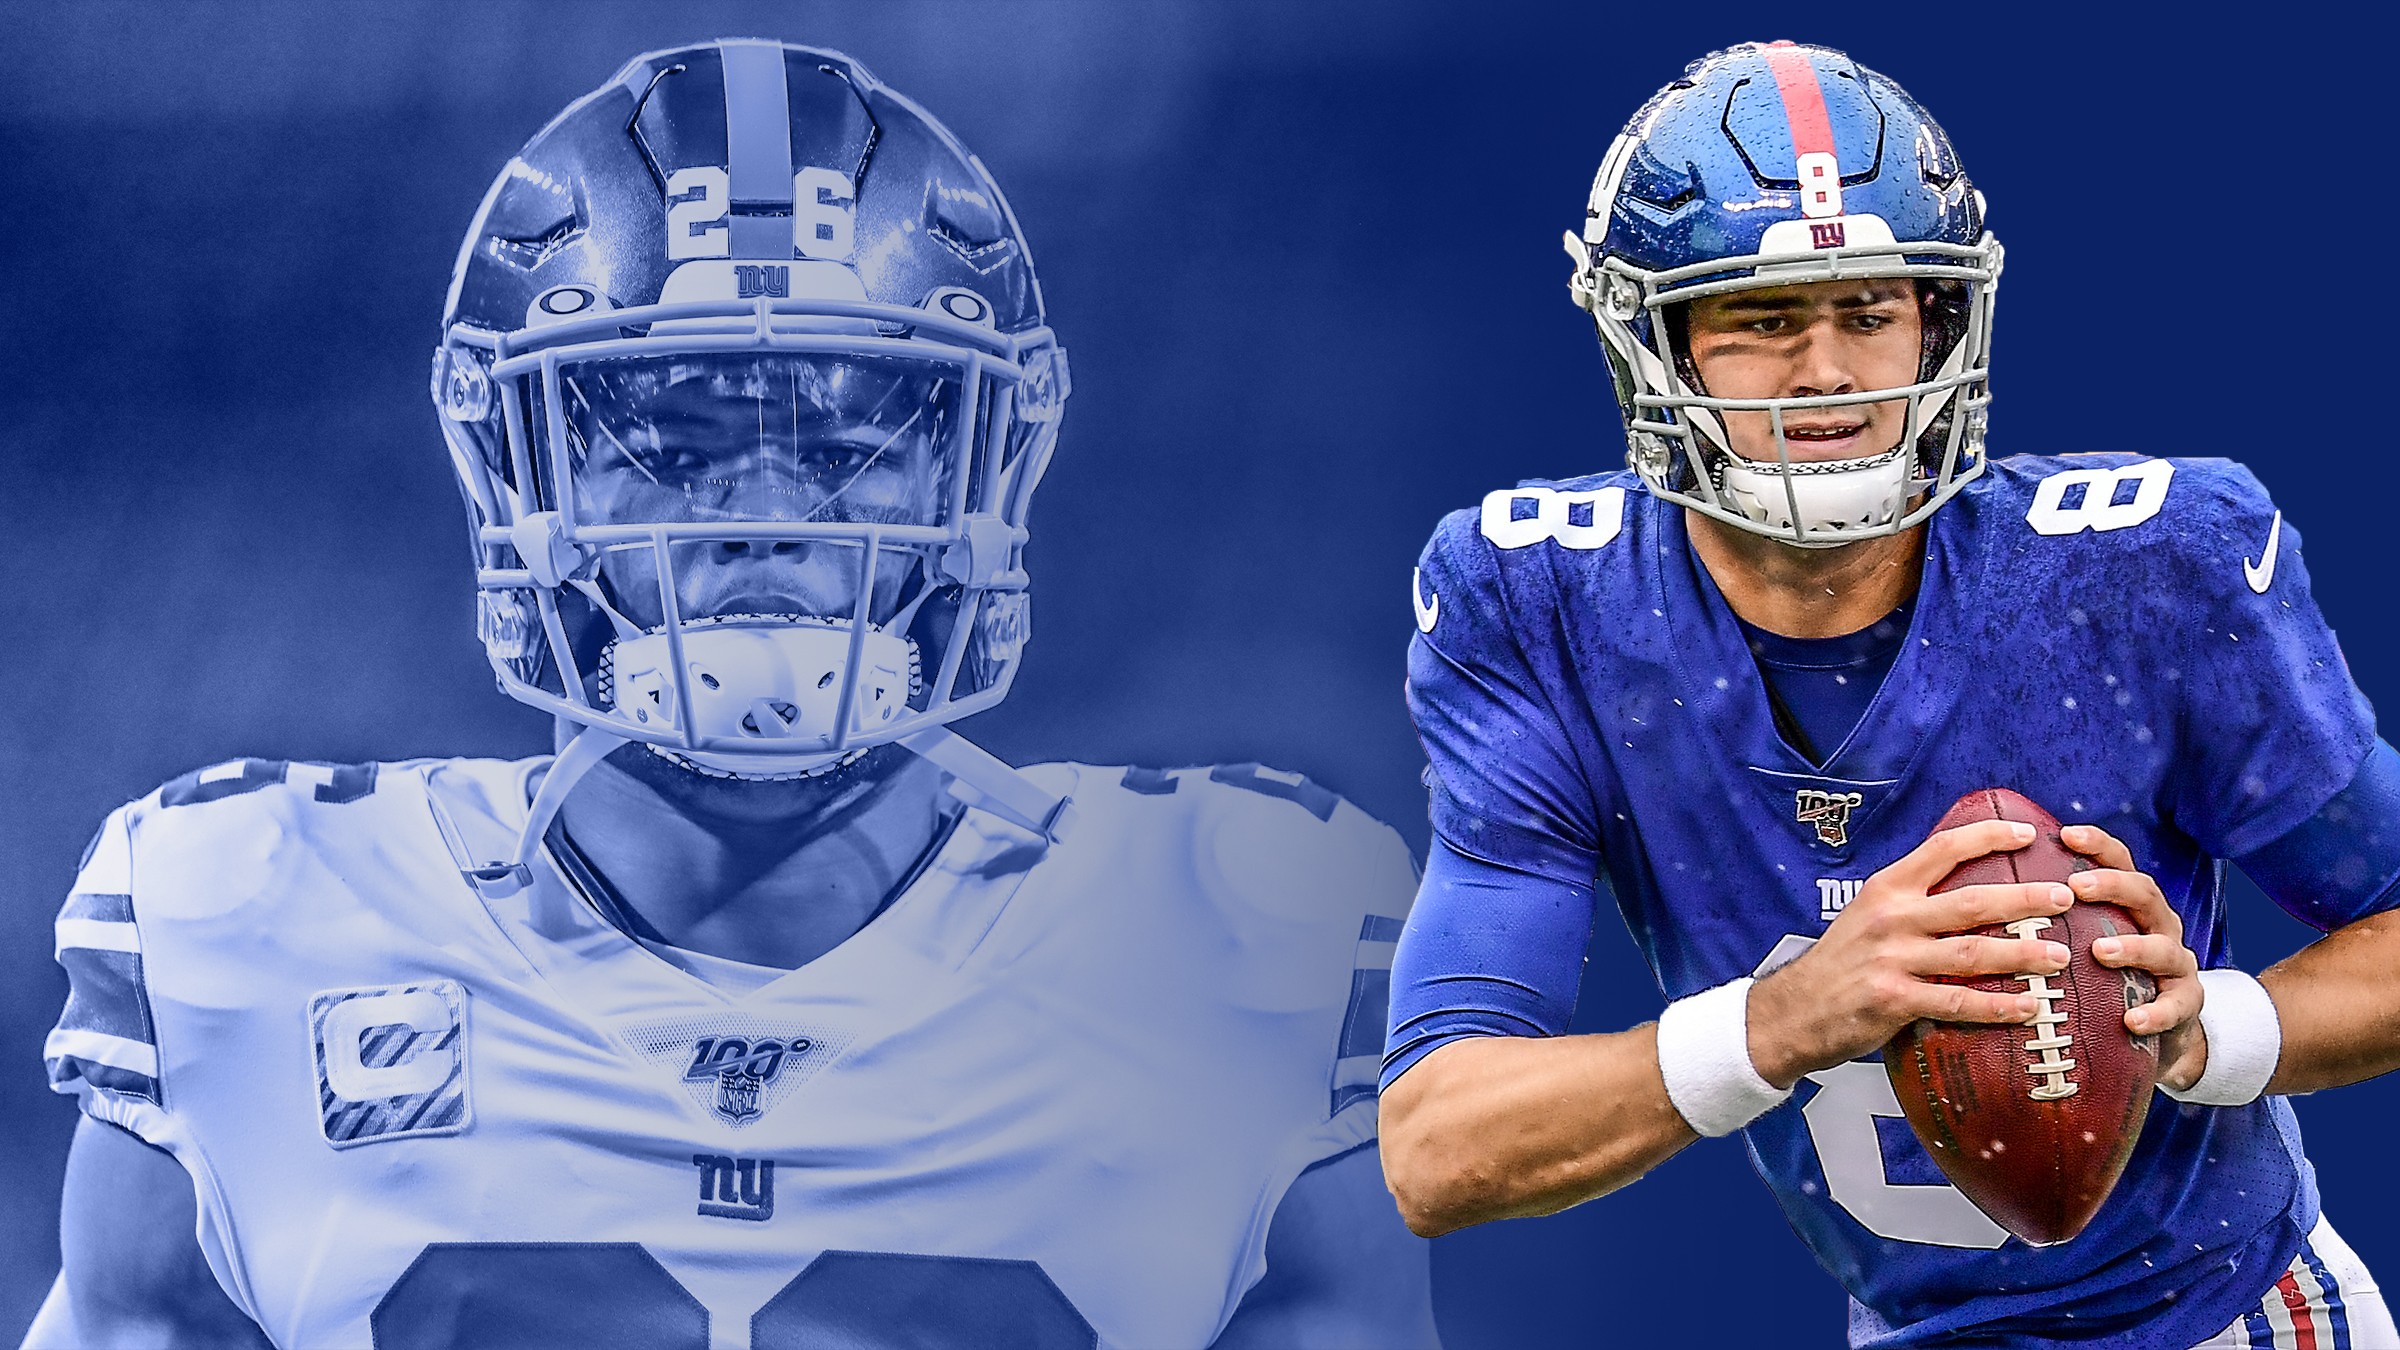 What to watch for over the second half of the New York Giants’ season